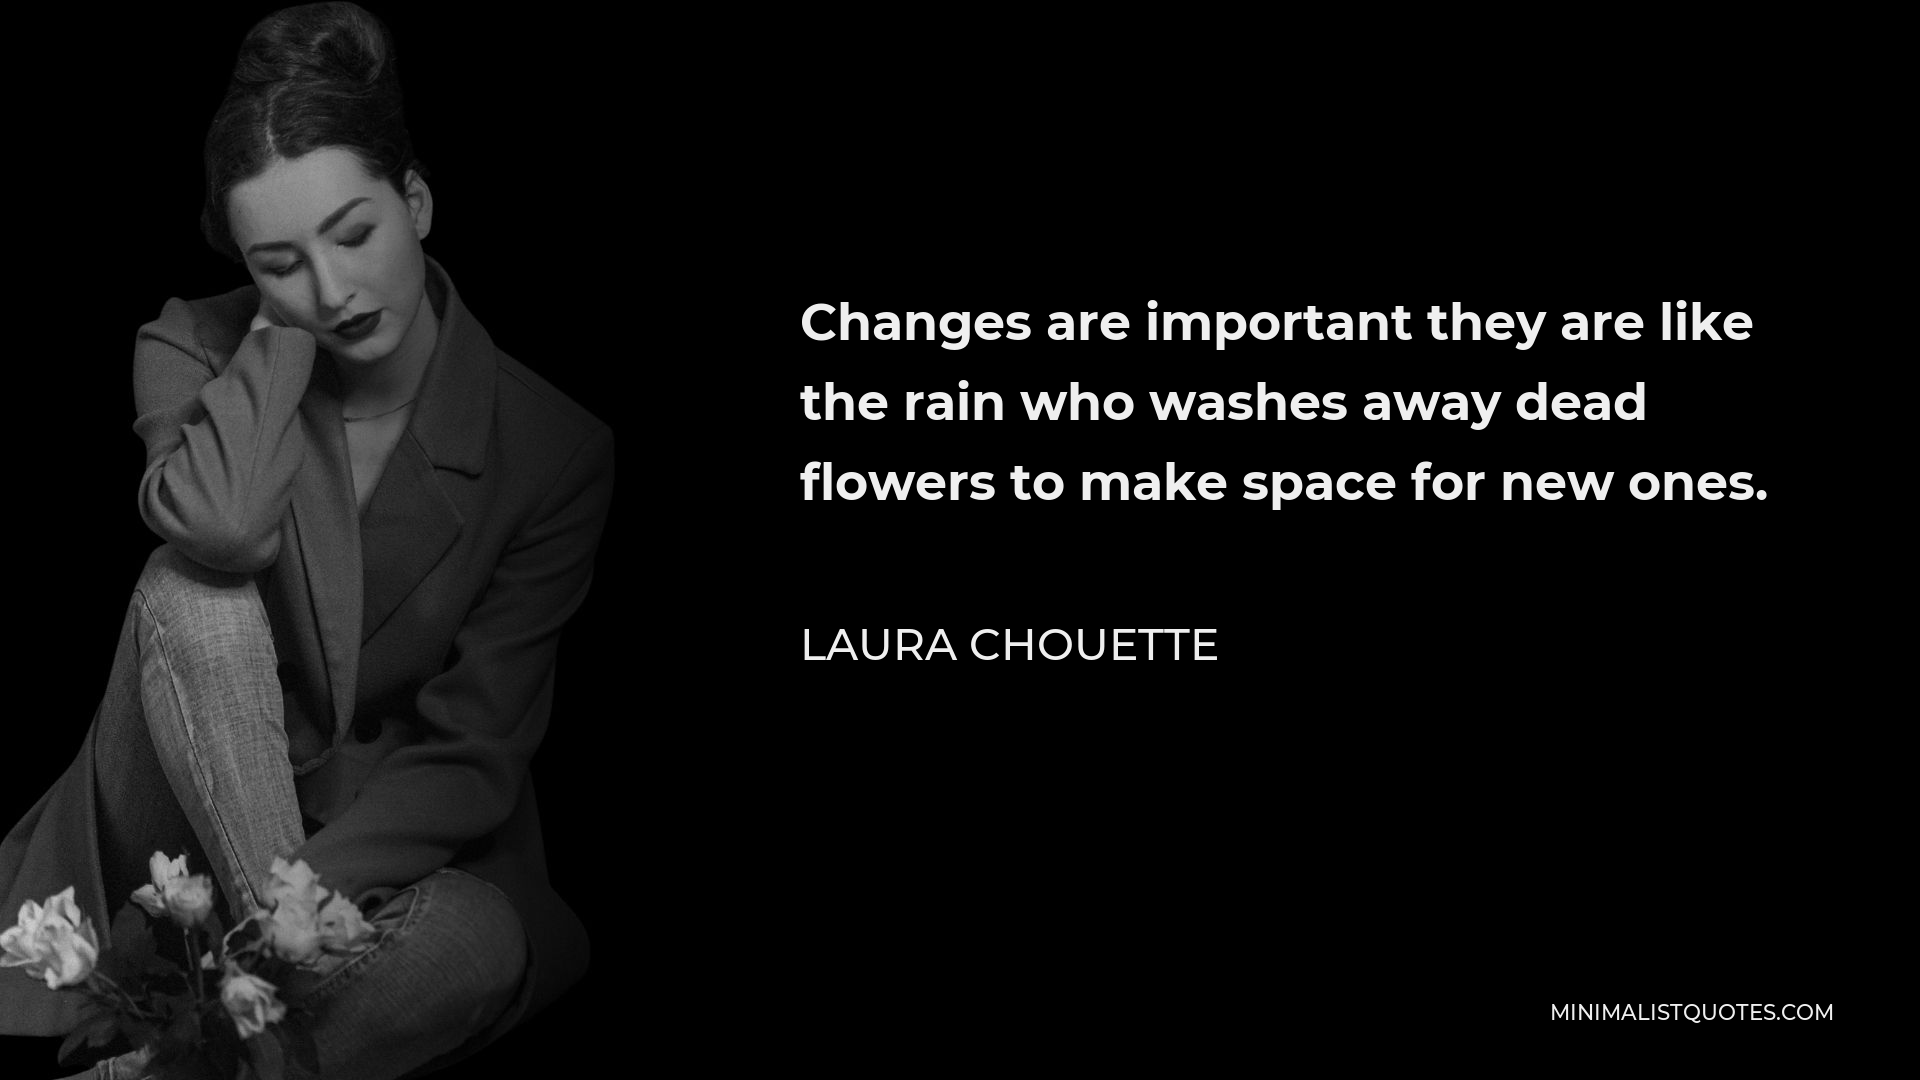 Laura Chouette Quote - Changes are important they are like the rain who washes away dead flowers to make space for new ones.